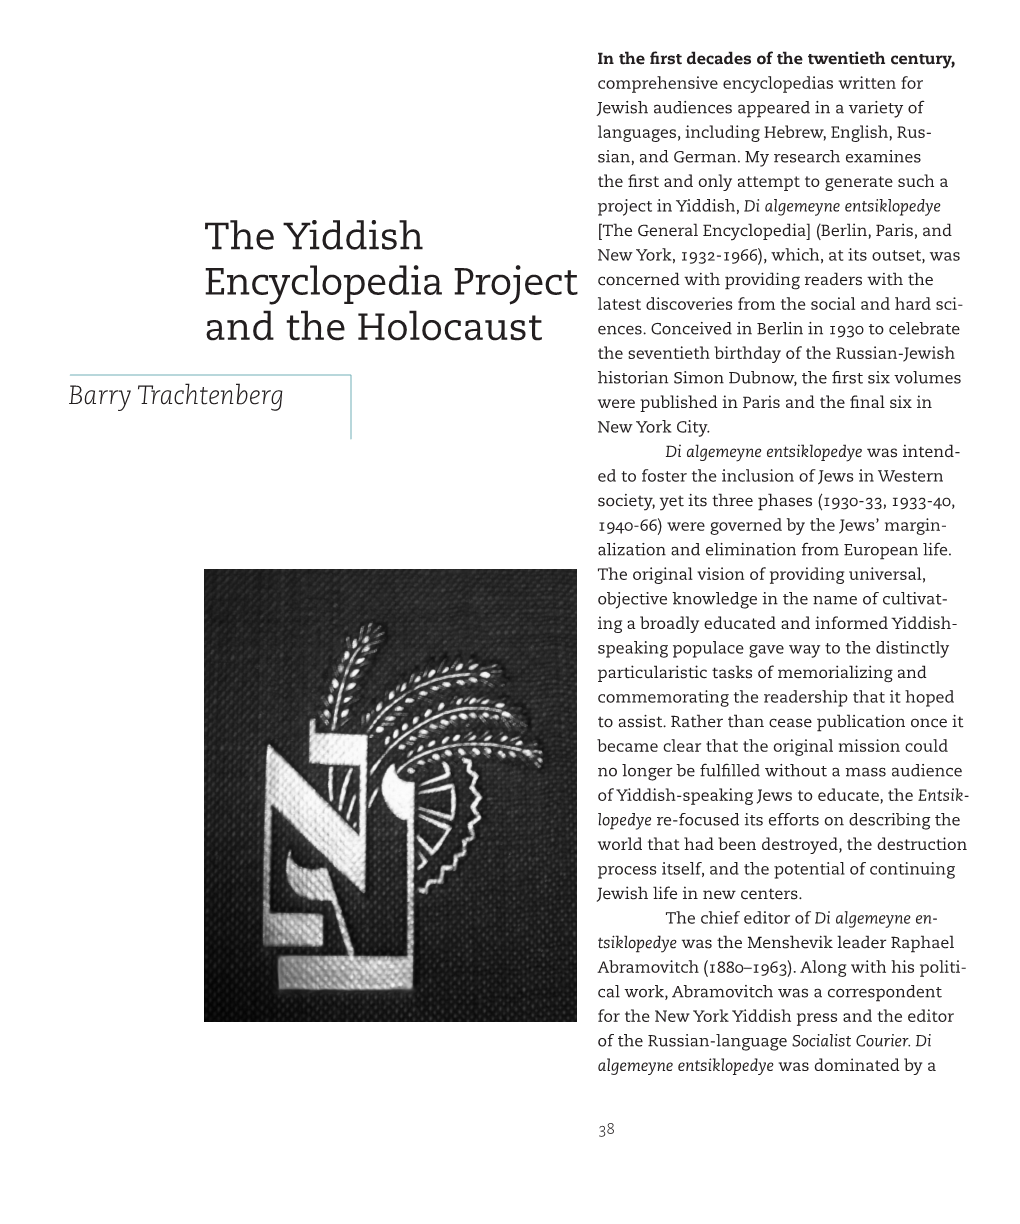 The Yiddish Encyclopedia Project and the Holocaust